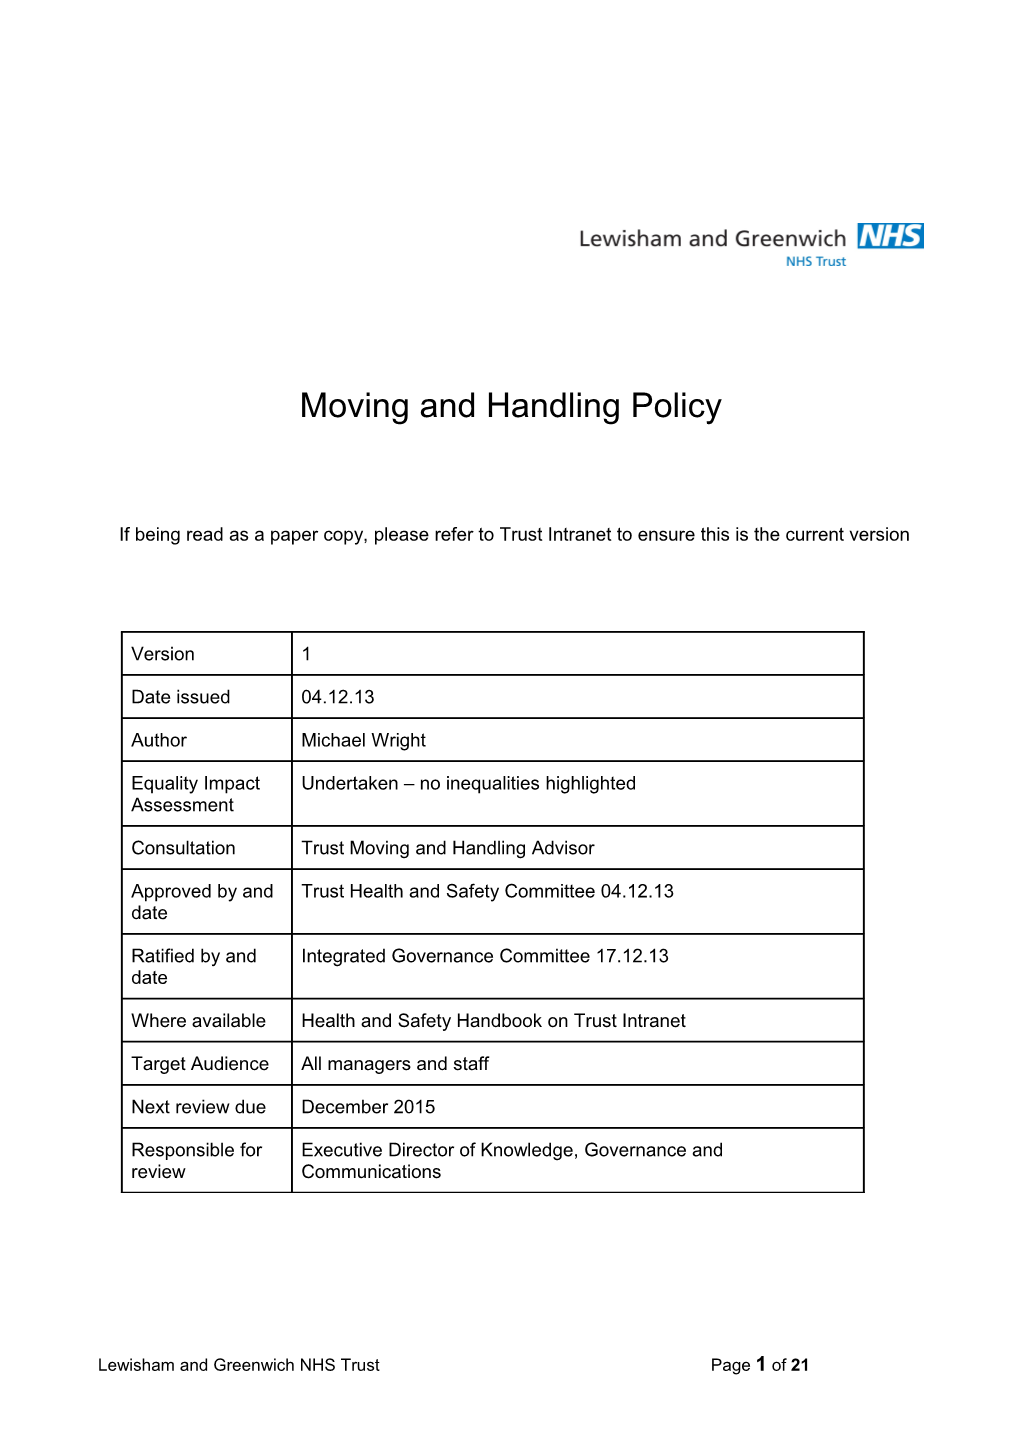 Moving and Handling Policy Version 1 December 2013